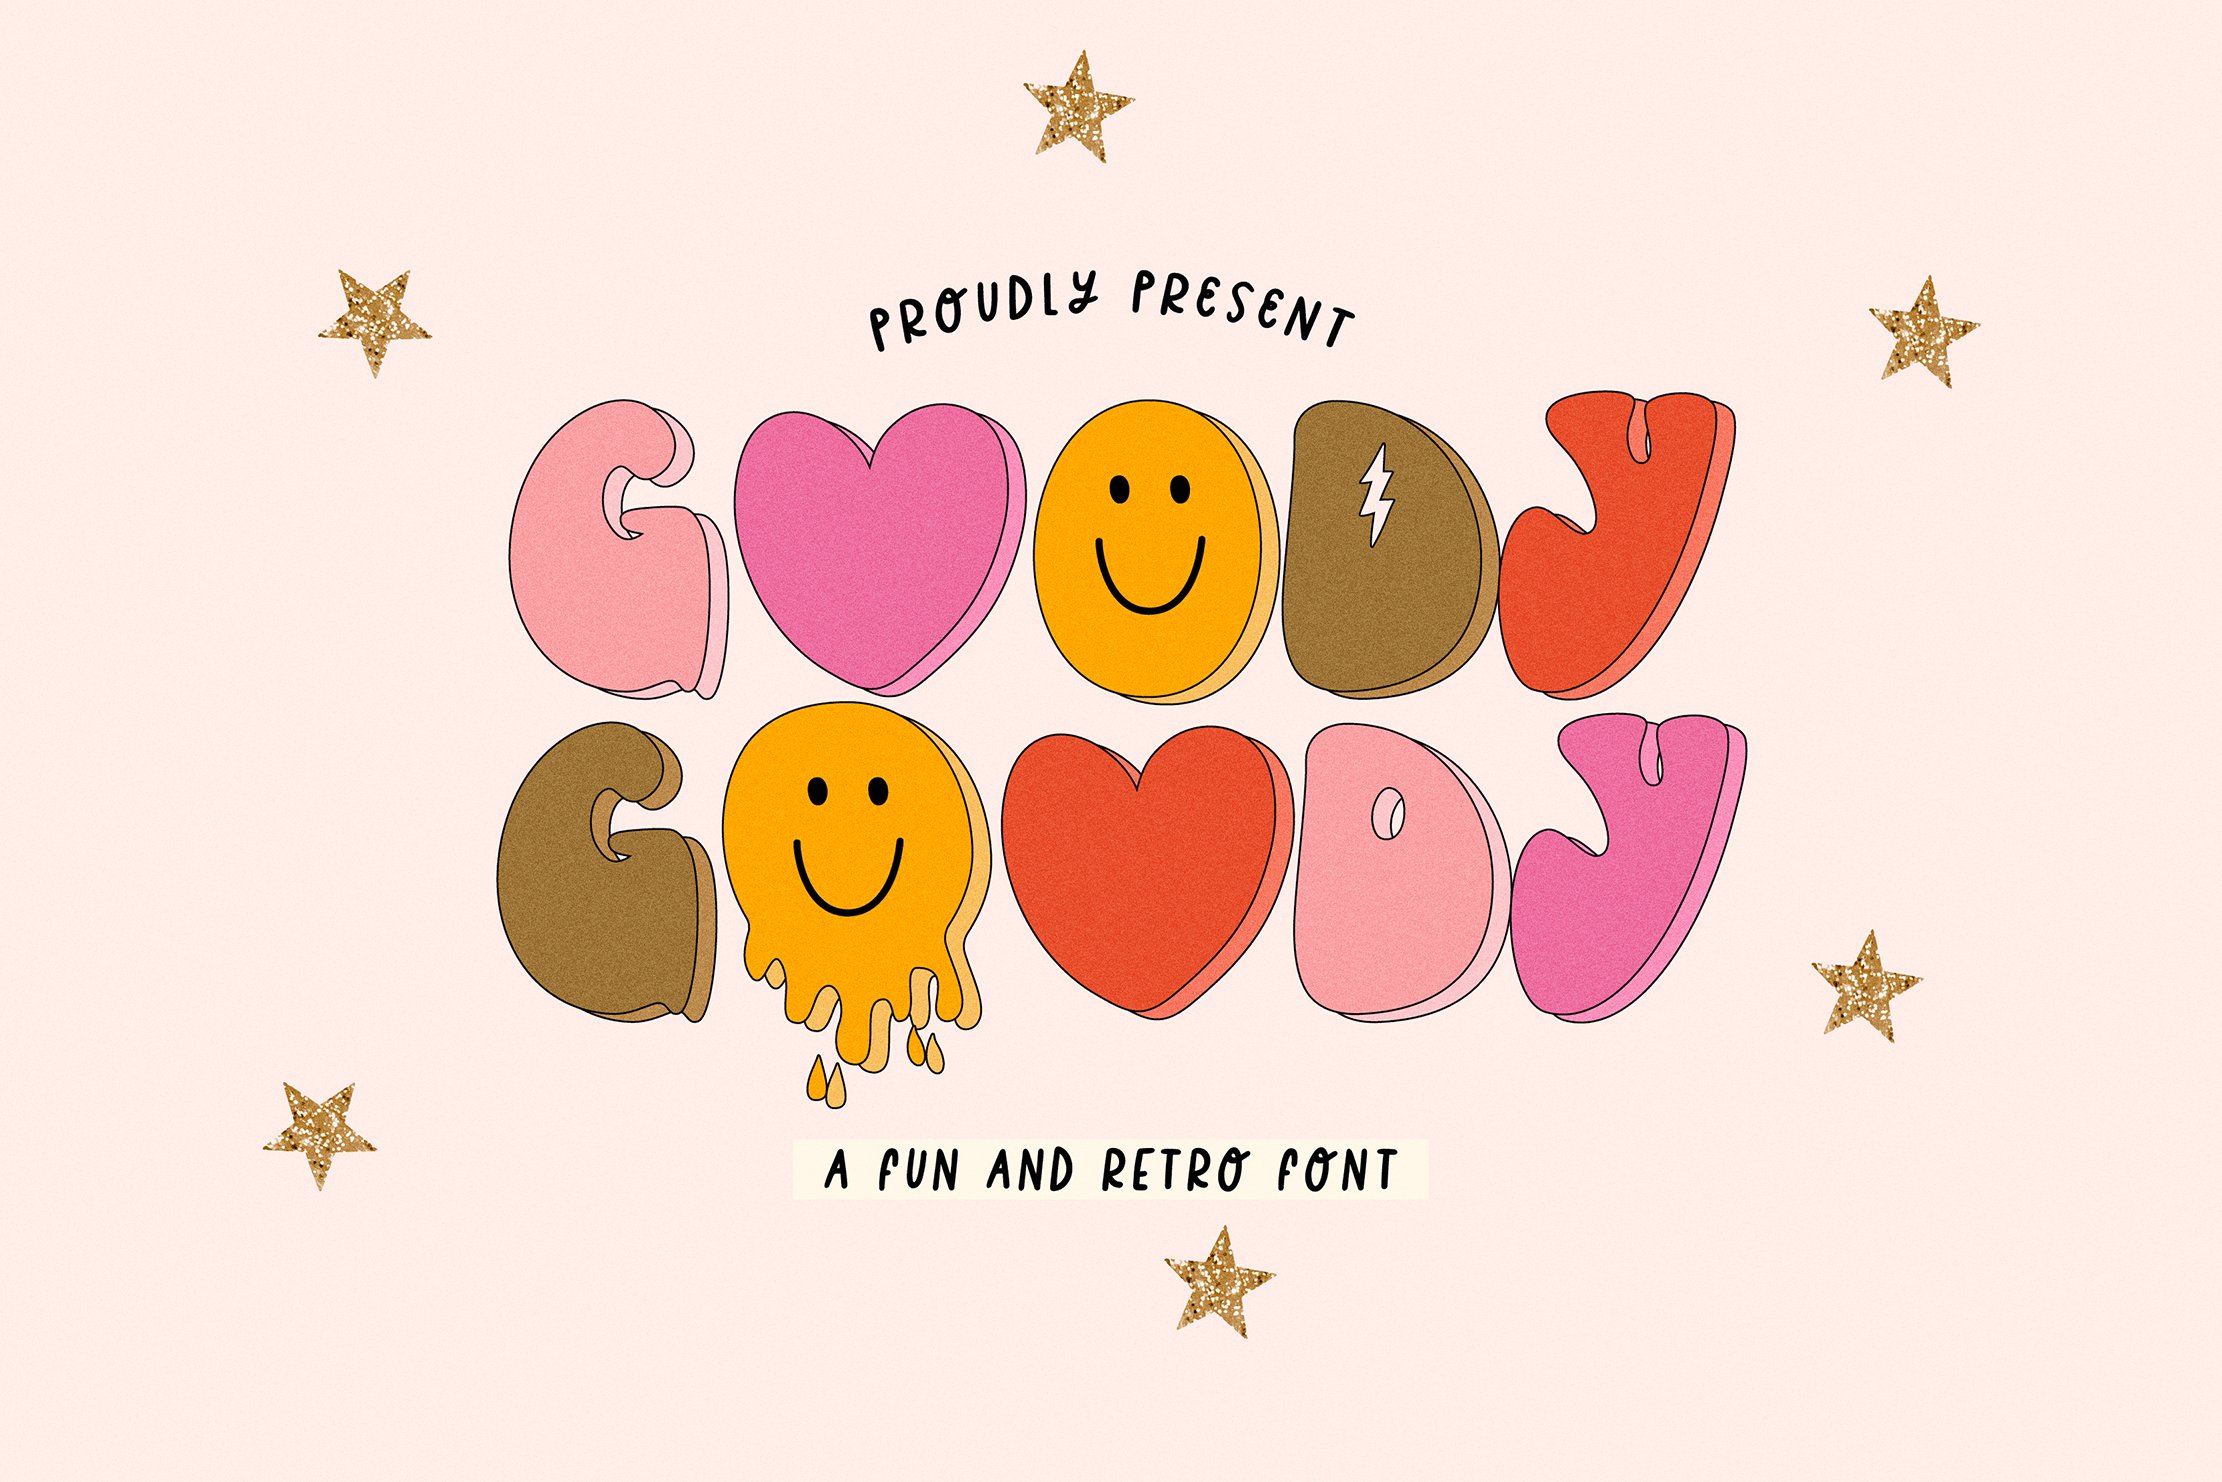 GOODY-GODDY cover image.